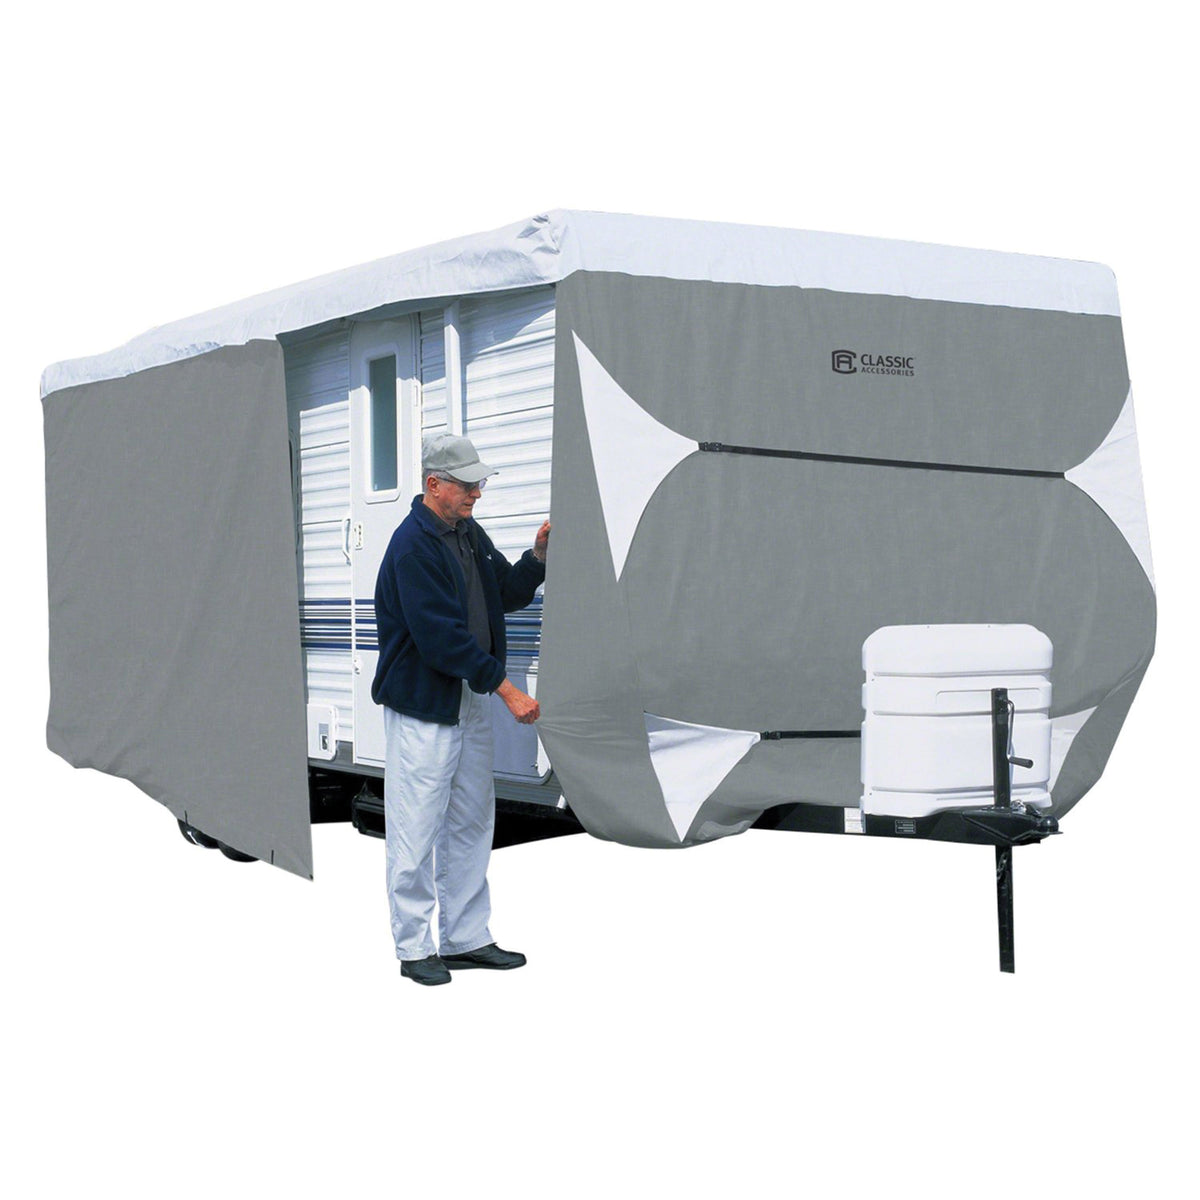 Classic Accessories 73263 Polypro 3 Deluxe Travel Trailer Cover - 20' to 22'